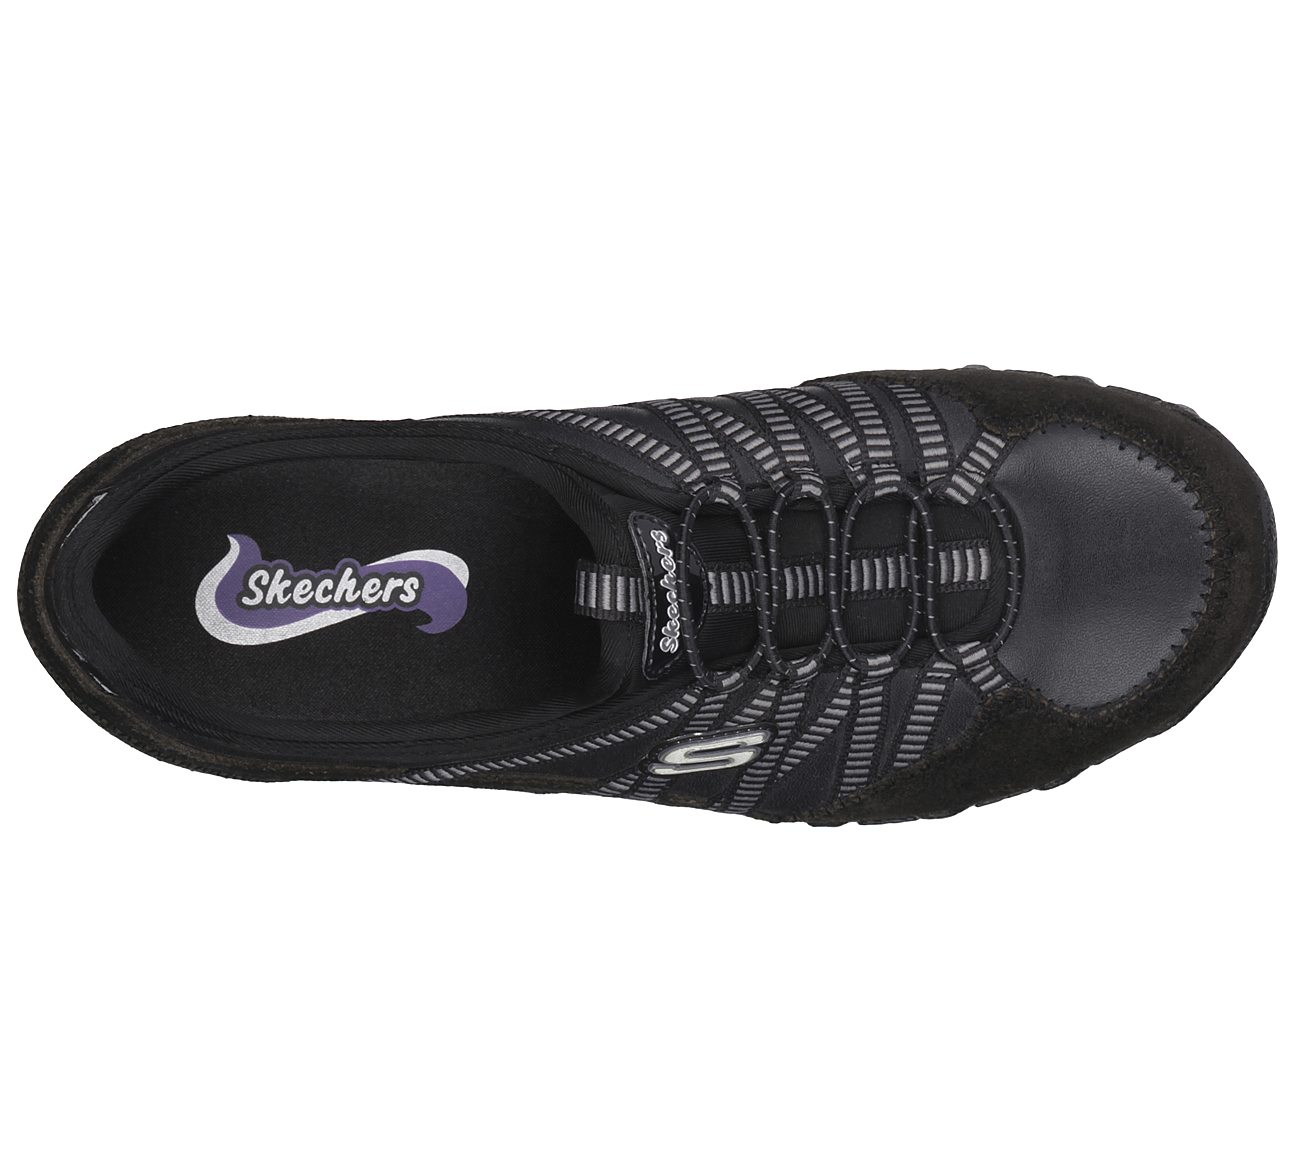 skechers dream come true leather and suede ladies trainers